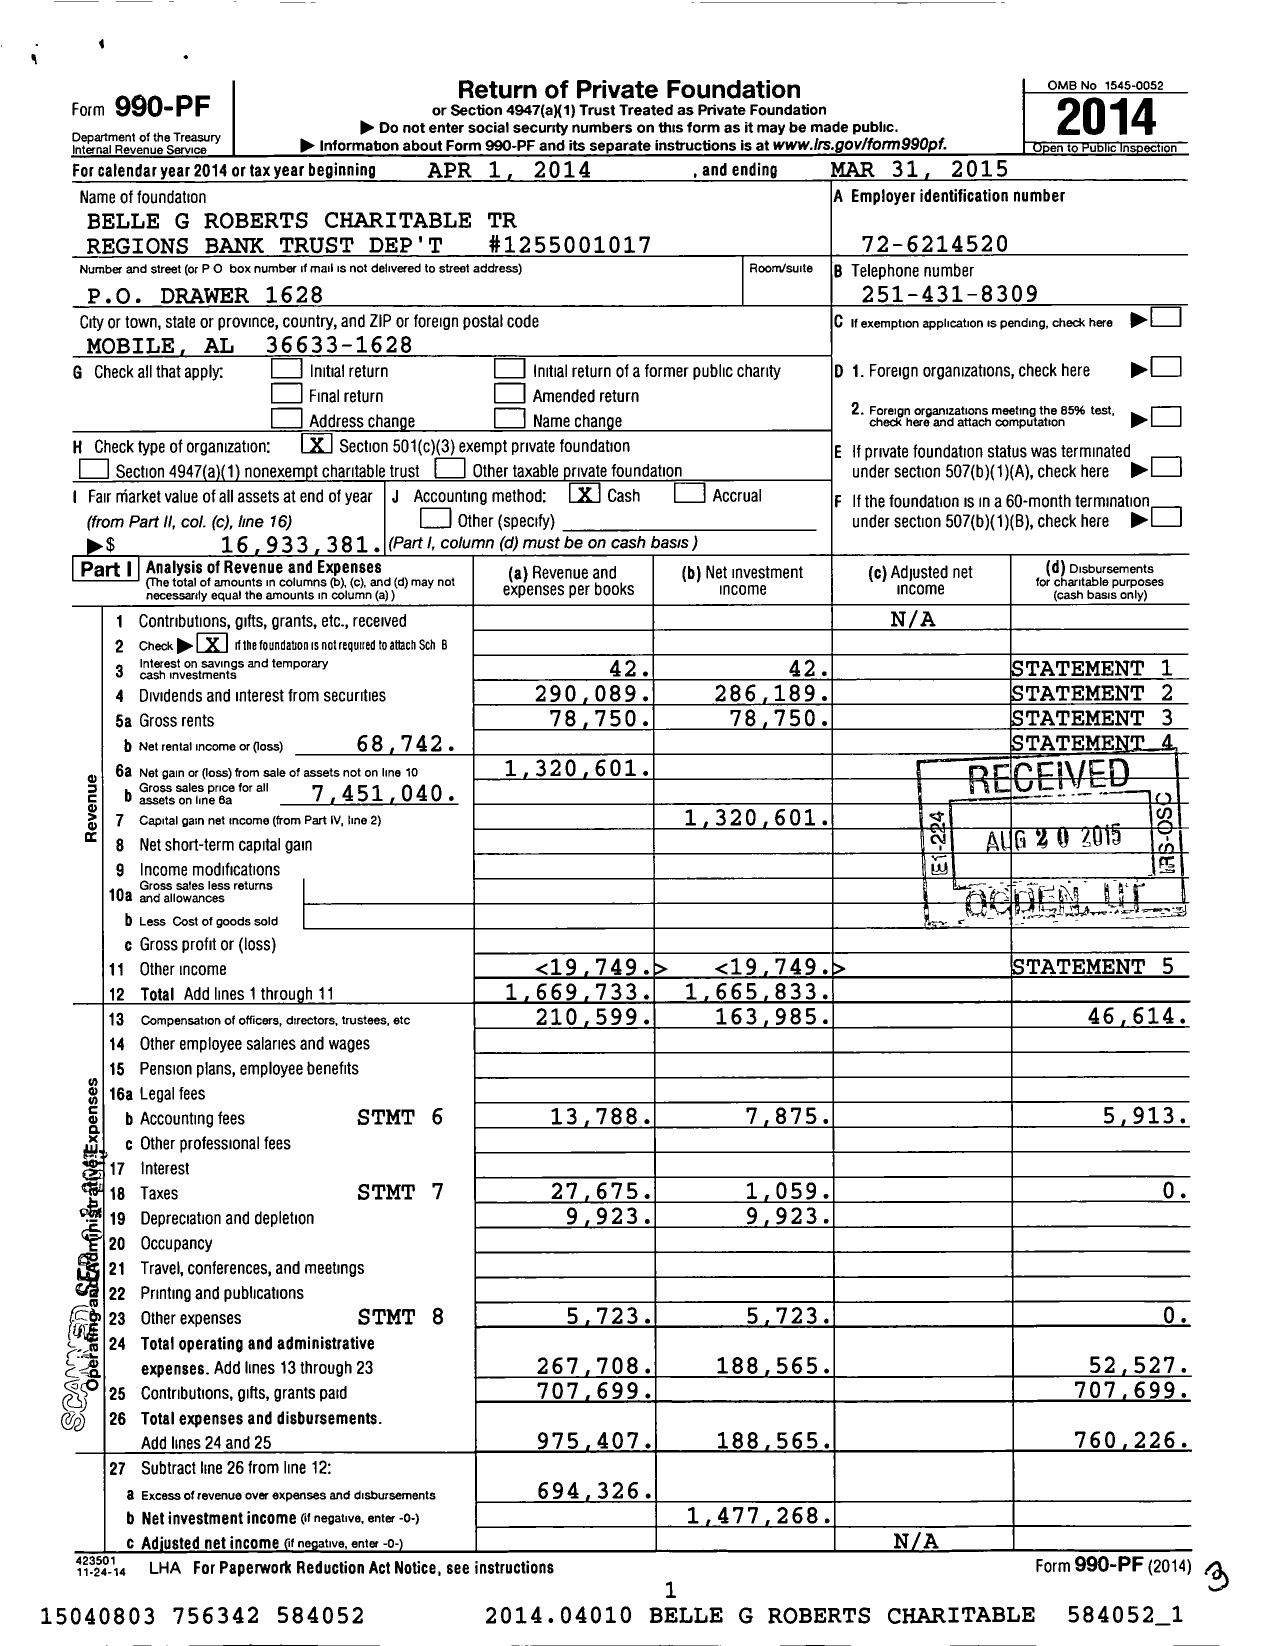 Image of first page of 2014 Form 990PF for Belle G Roberts Charitable TR Regions Bank Trust Dep't #1255001017